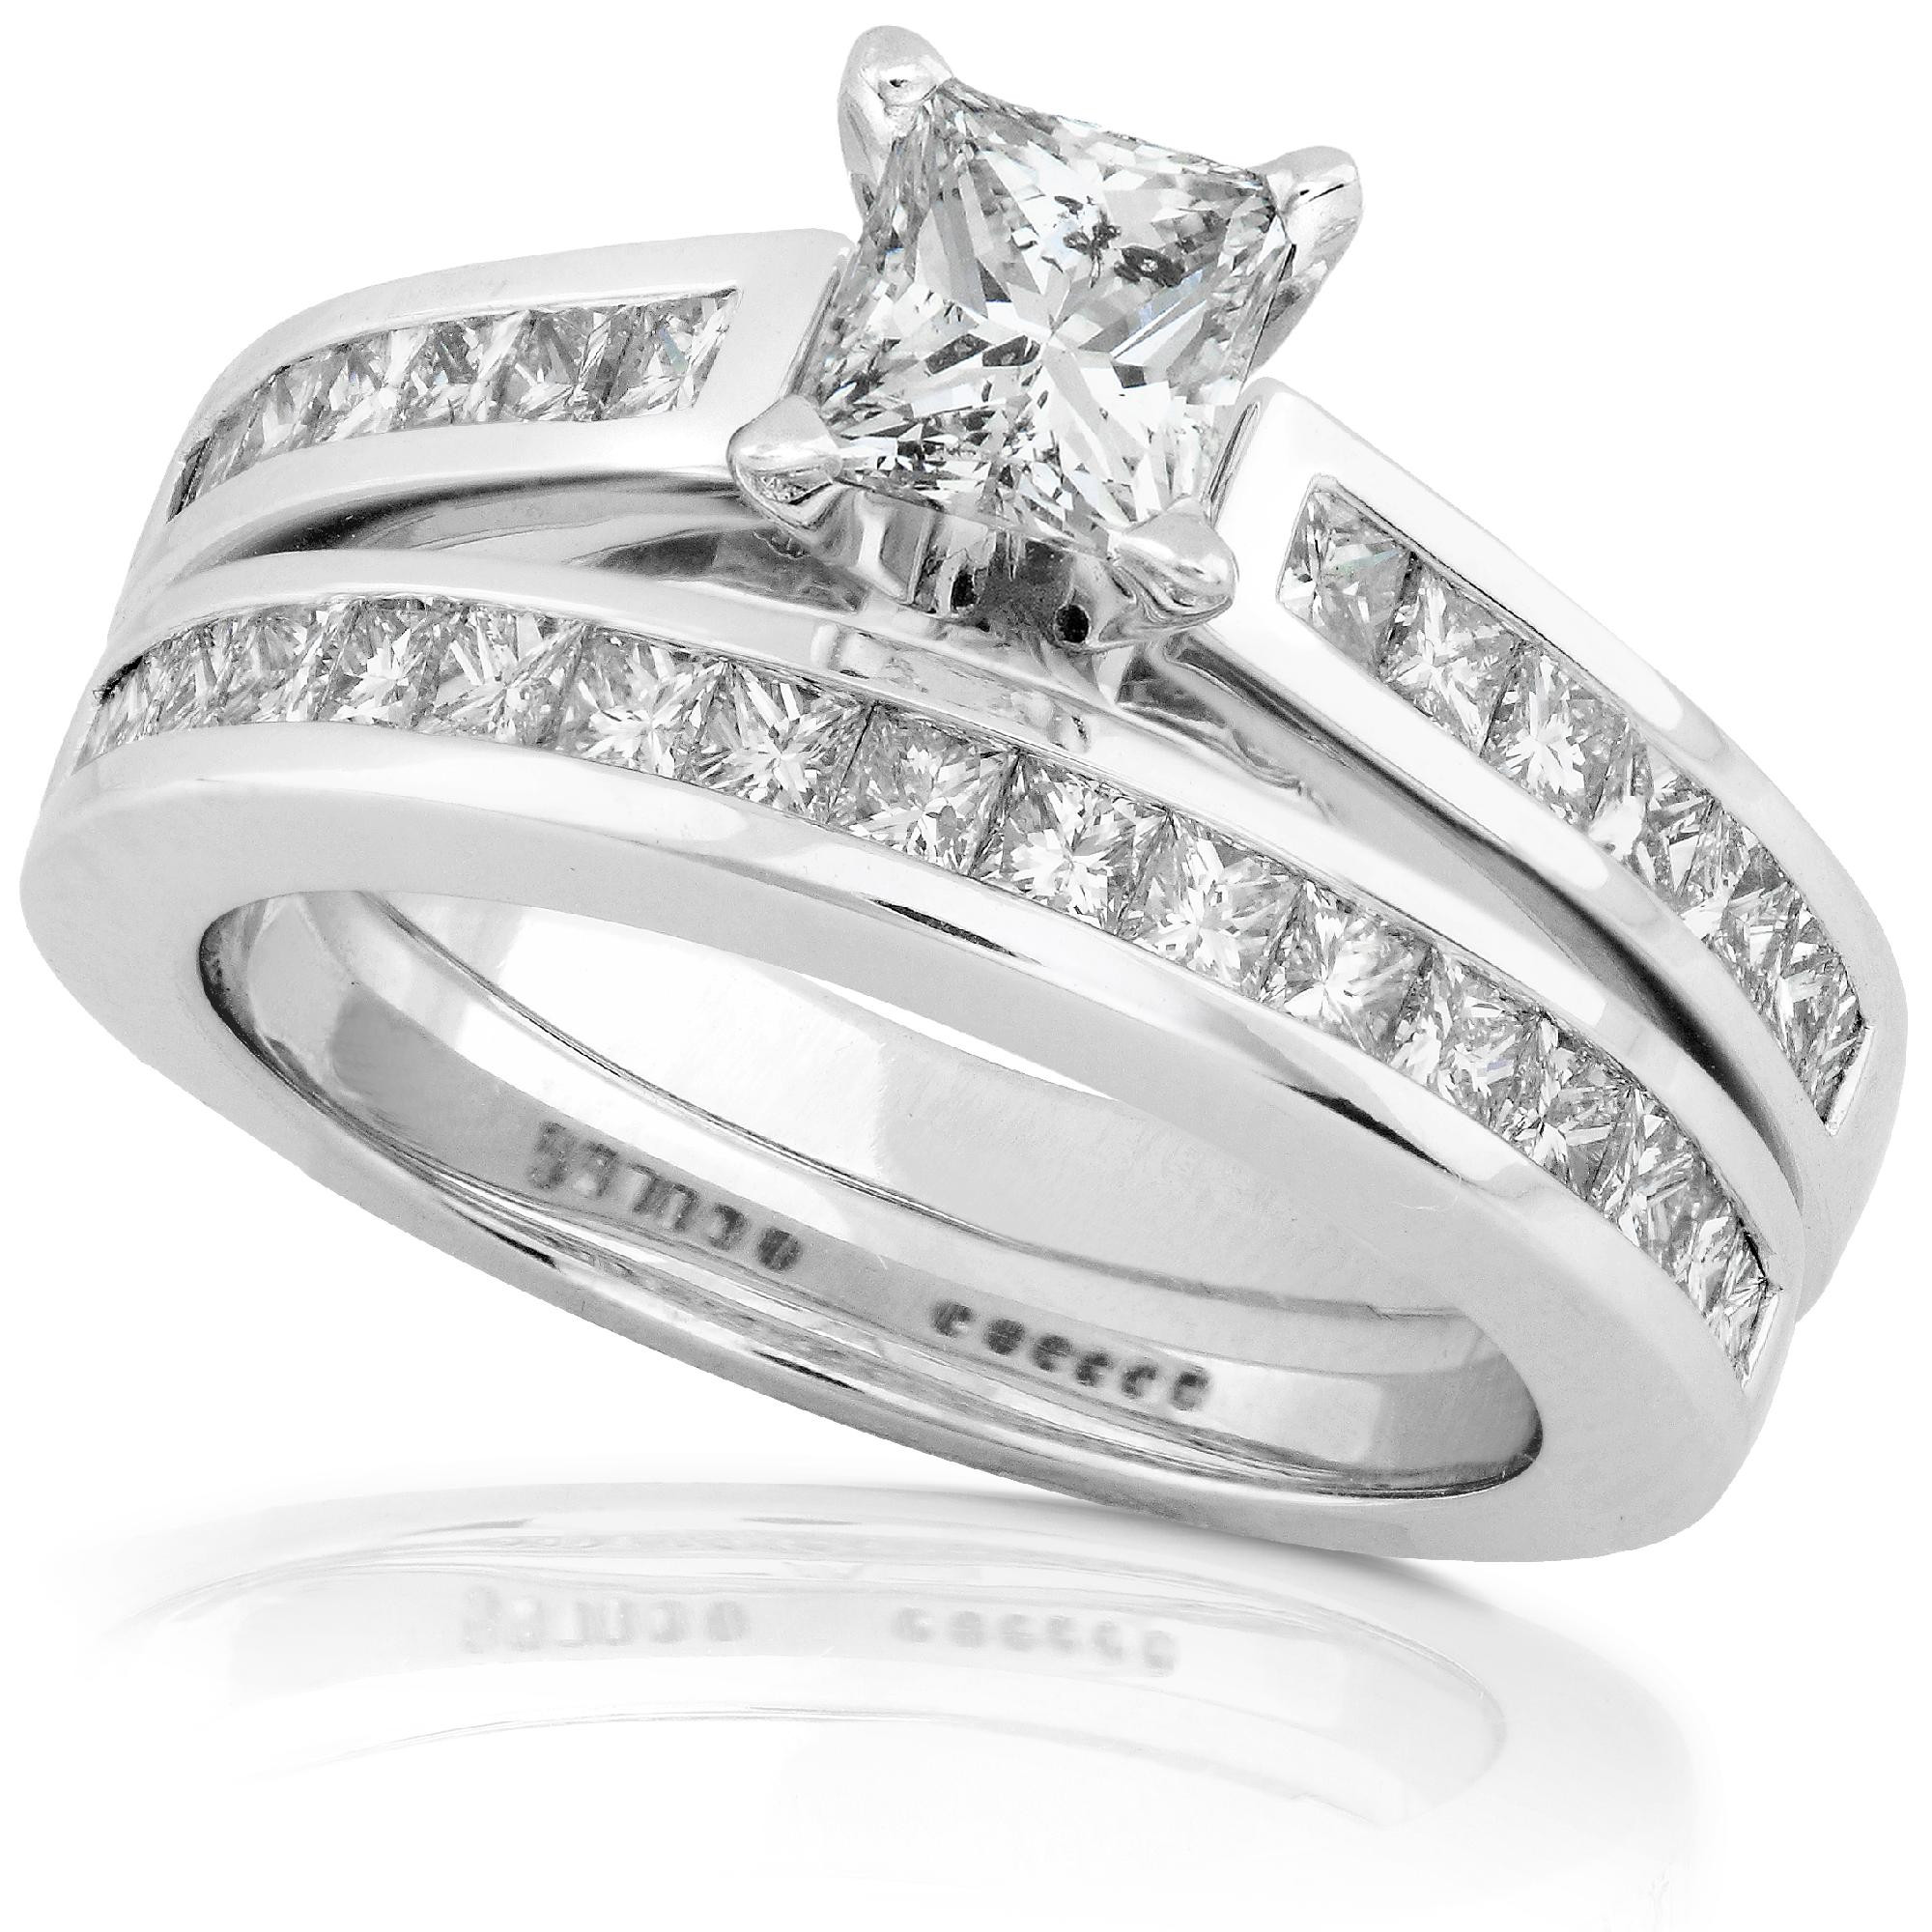 Wedding Bands On Sale
 Engagement Rings Sale